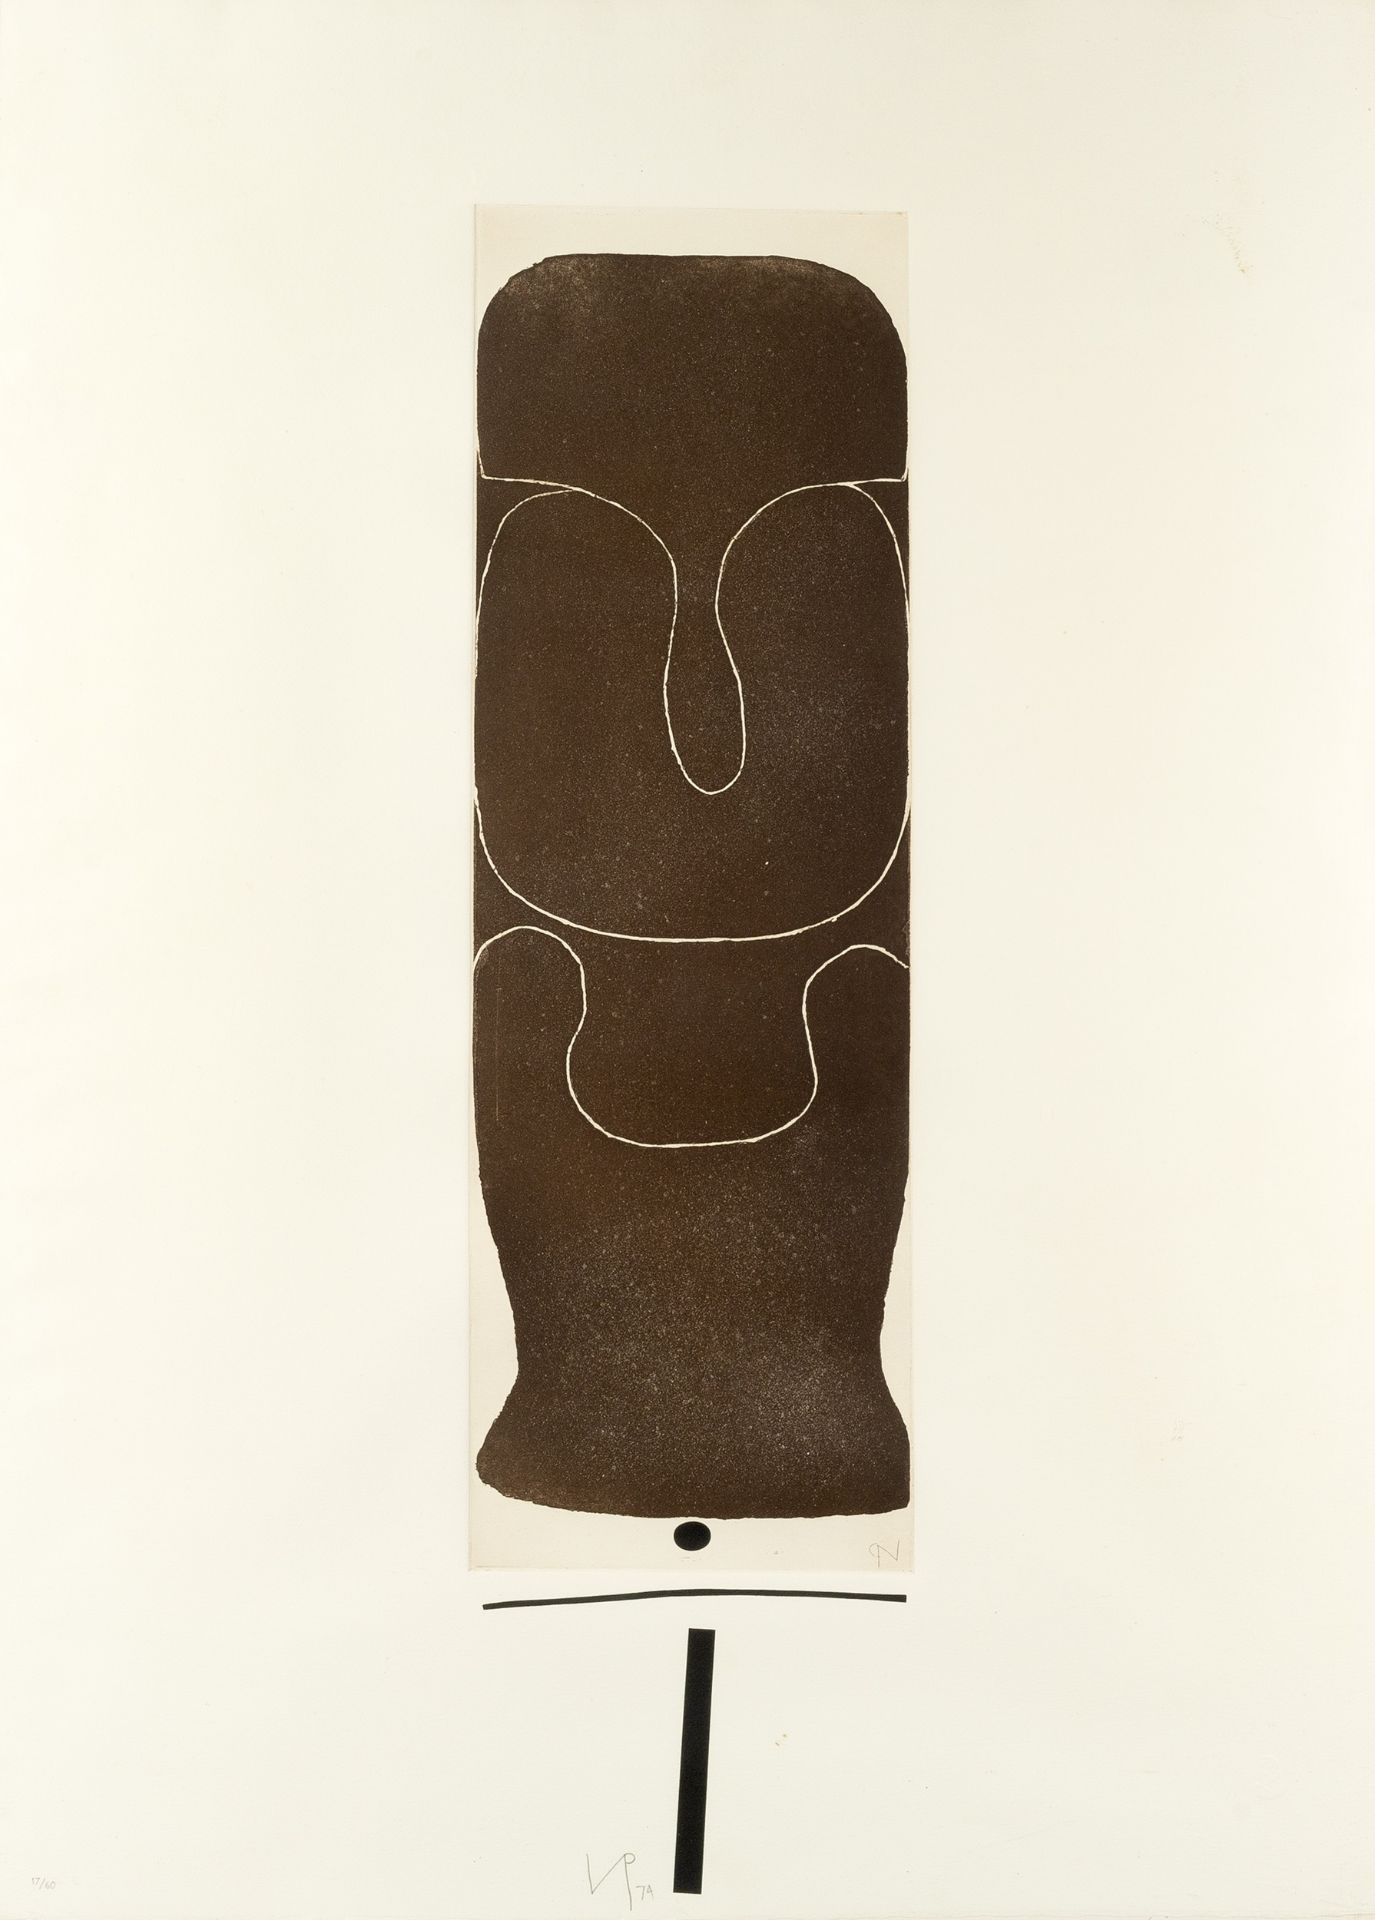 Victor Pasmore (1908-1998) Brown Image, 1974 17/60, signed, dated, and numbered in pencil (in the